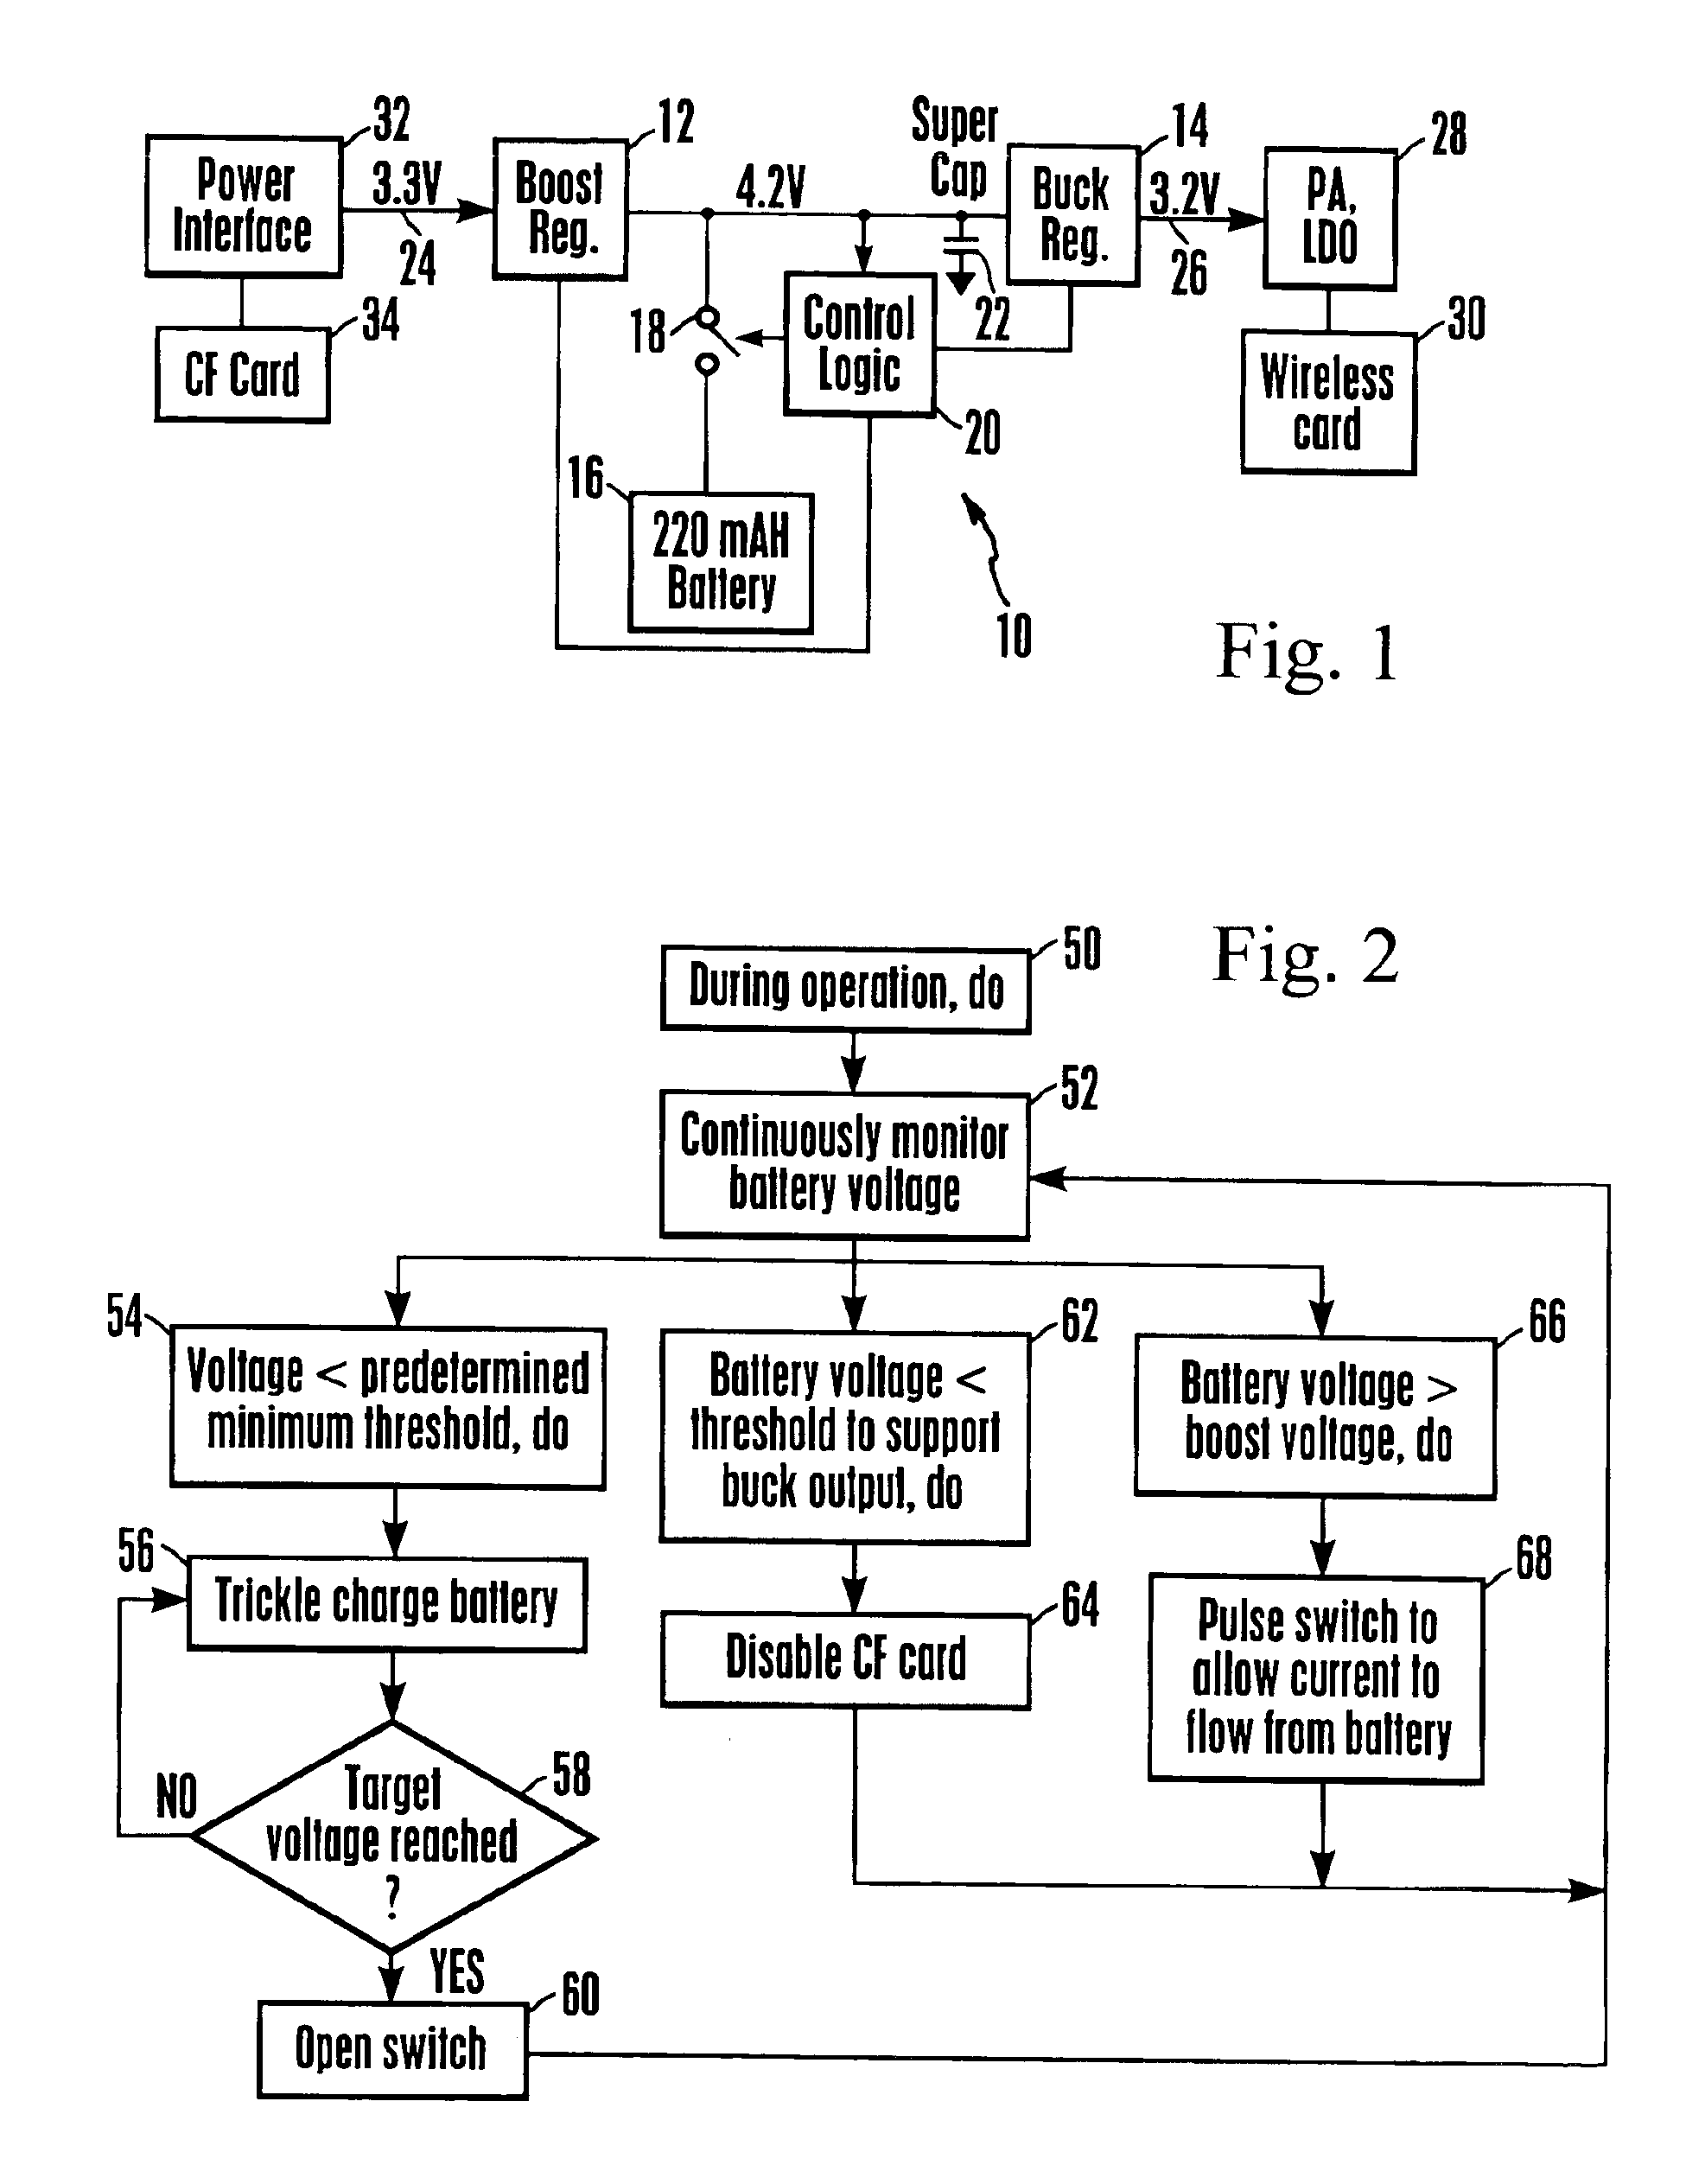 System and method for reducing external battery capacity requirement for a wireless card